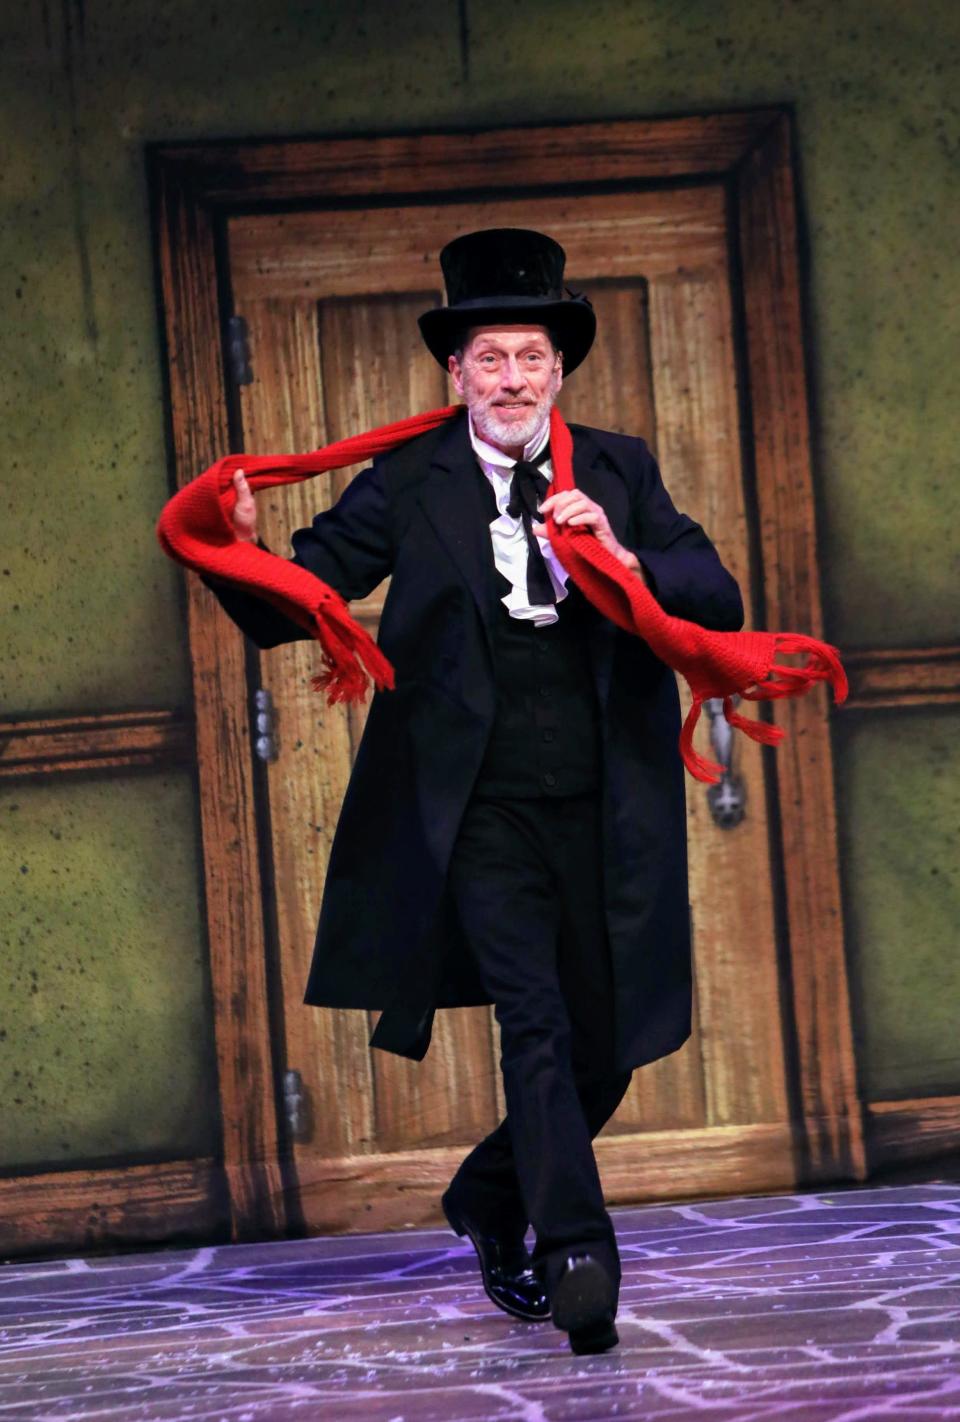 Brad Wages as Ebenezer Scrooge in the Venice Theatre production of “A Christmas Carol.”